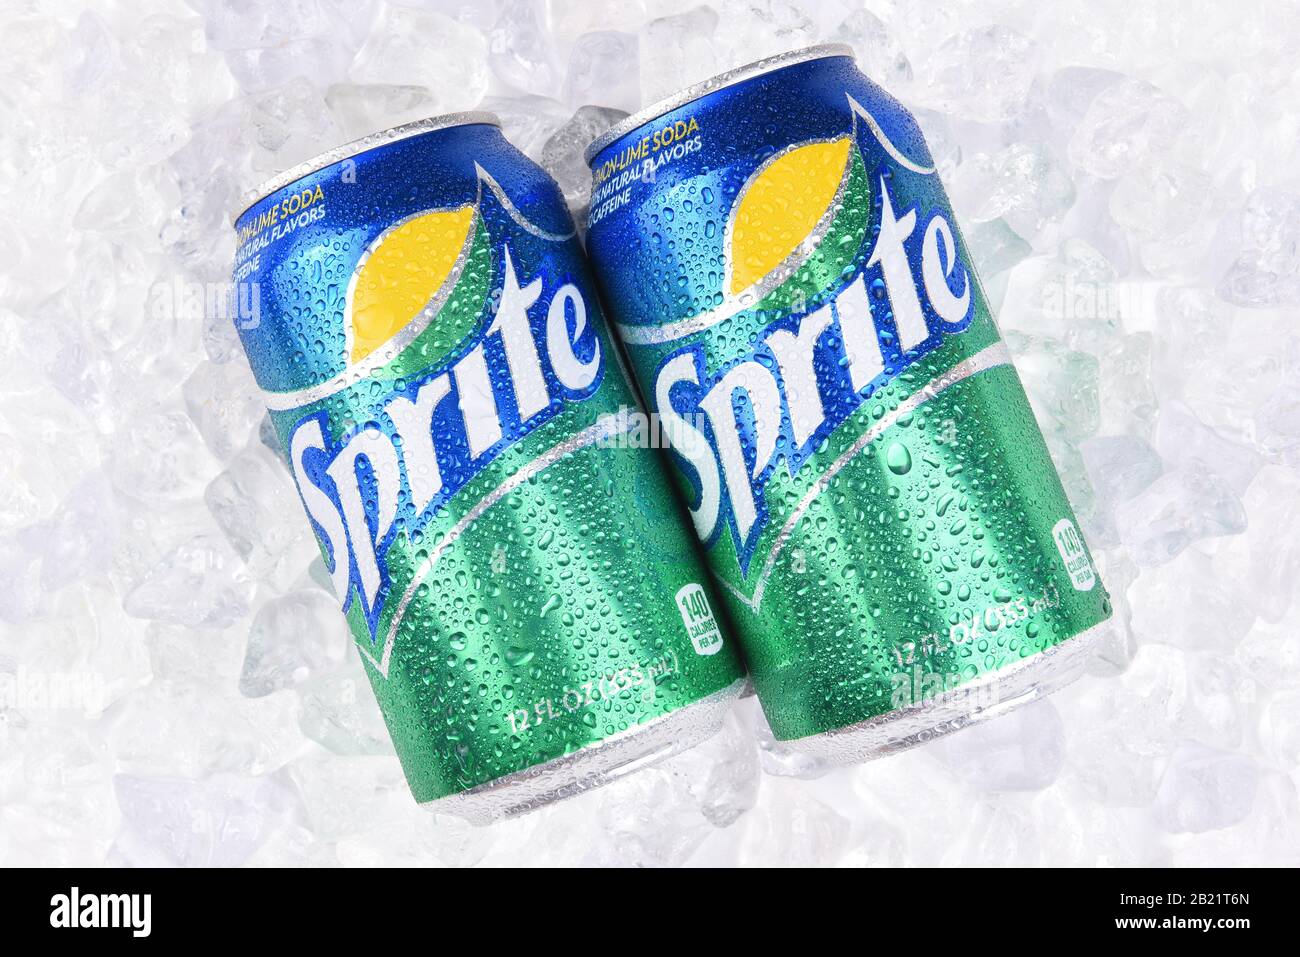 IRVINE, CALIFORNIA - JULY 10, 2017: Two Sprite Cans on a bed of